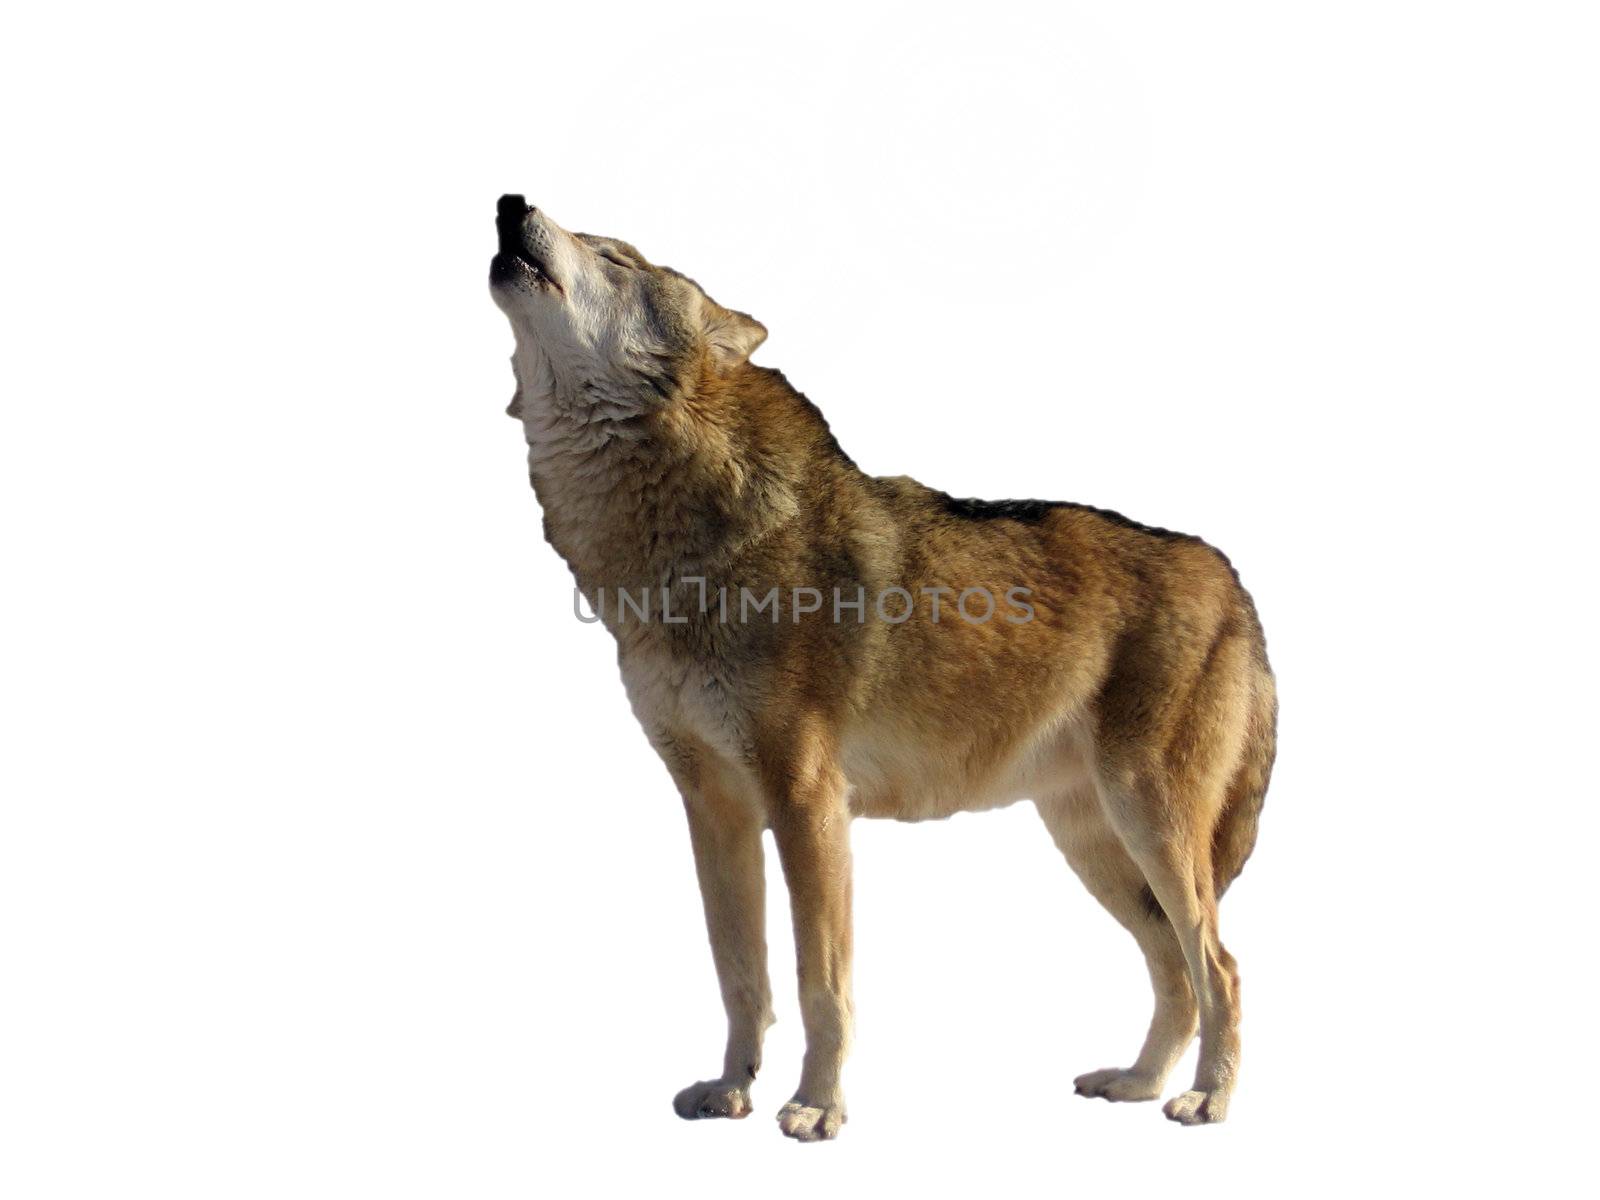 Isolated singing wolf on a white background